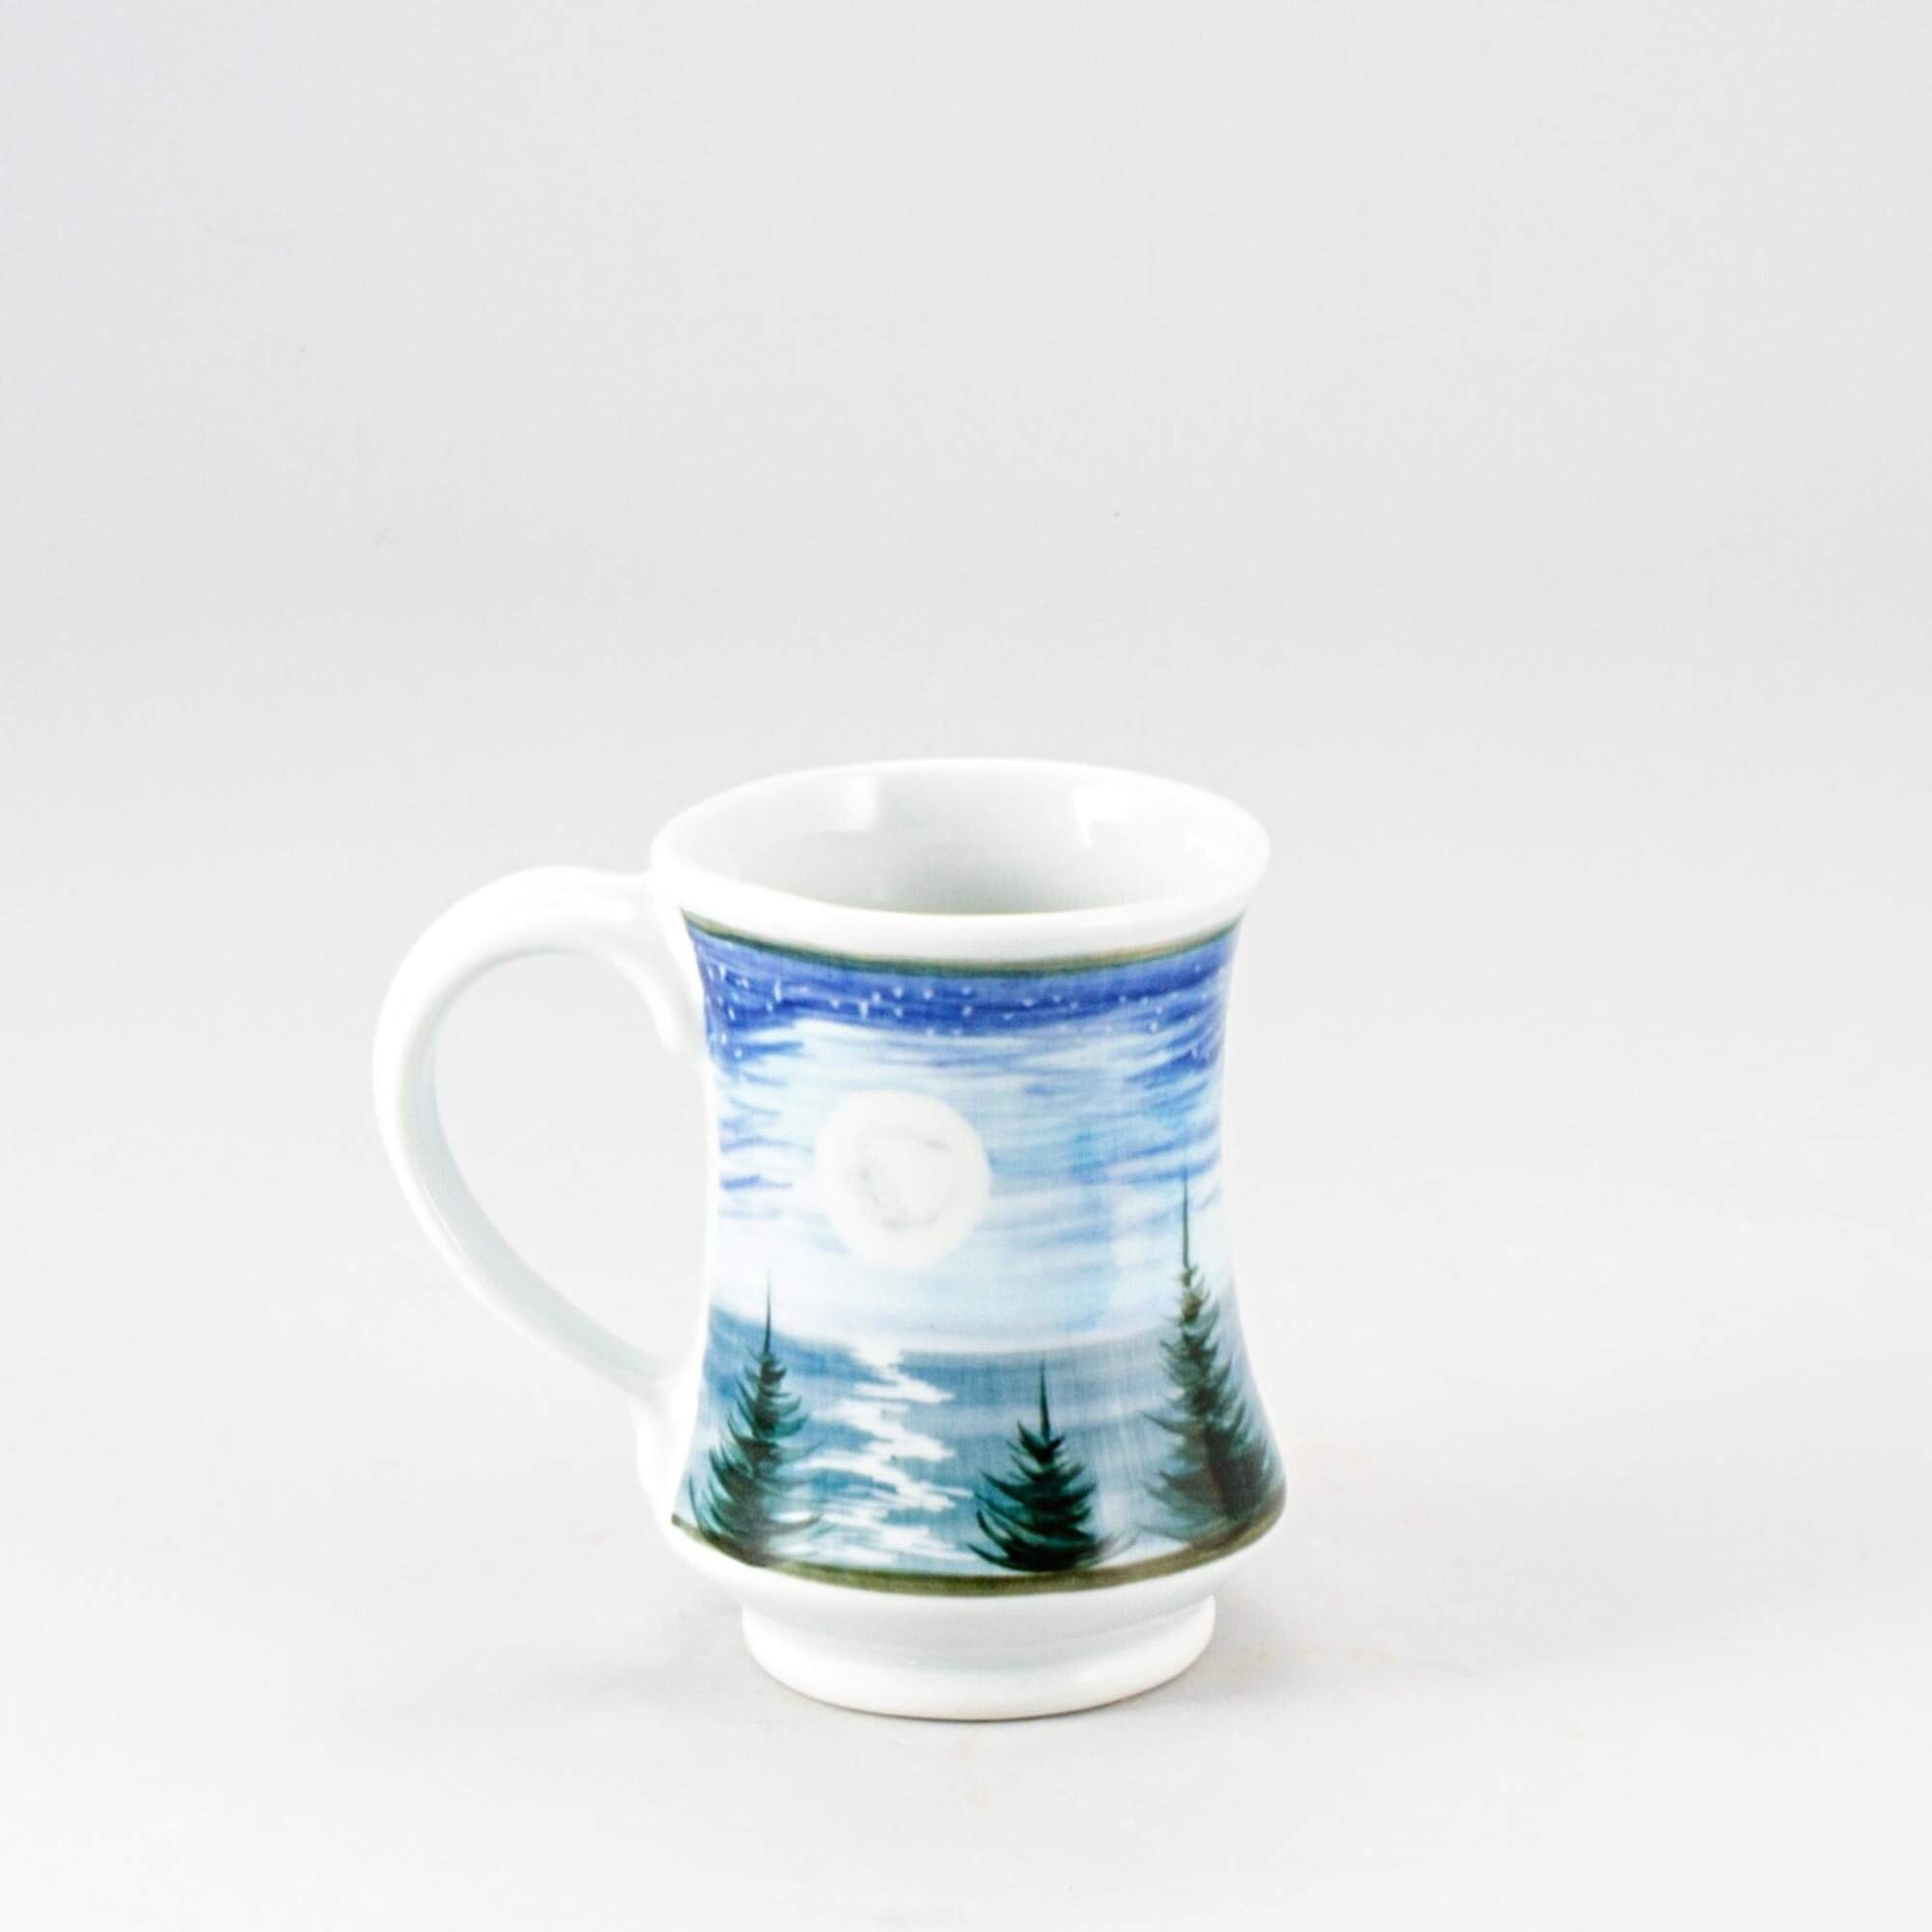 Handmade Pottery Pedestal Mug made by Georgetown Pottery in Maine Moon